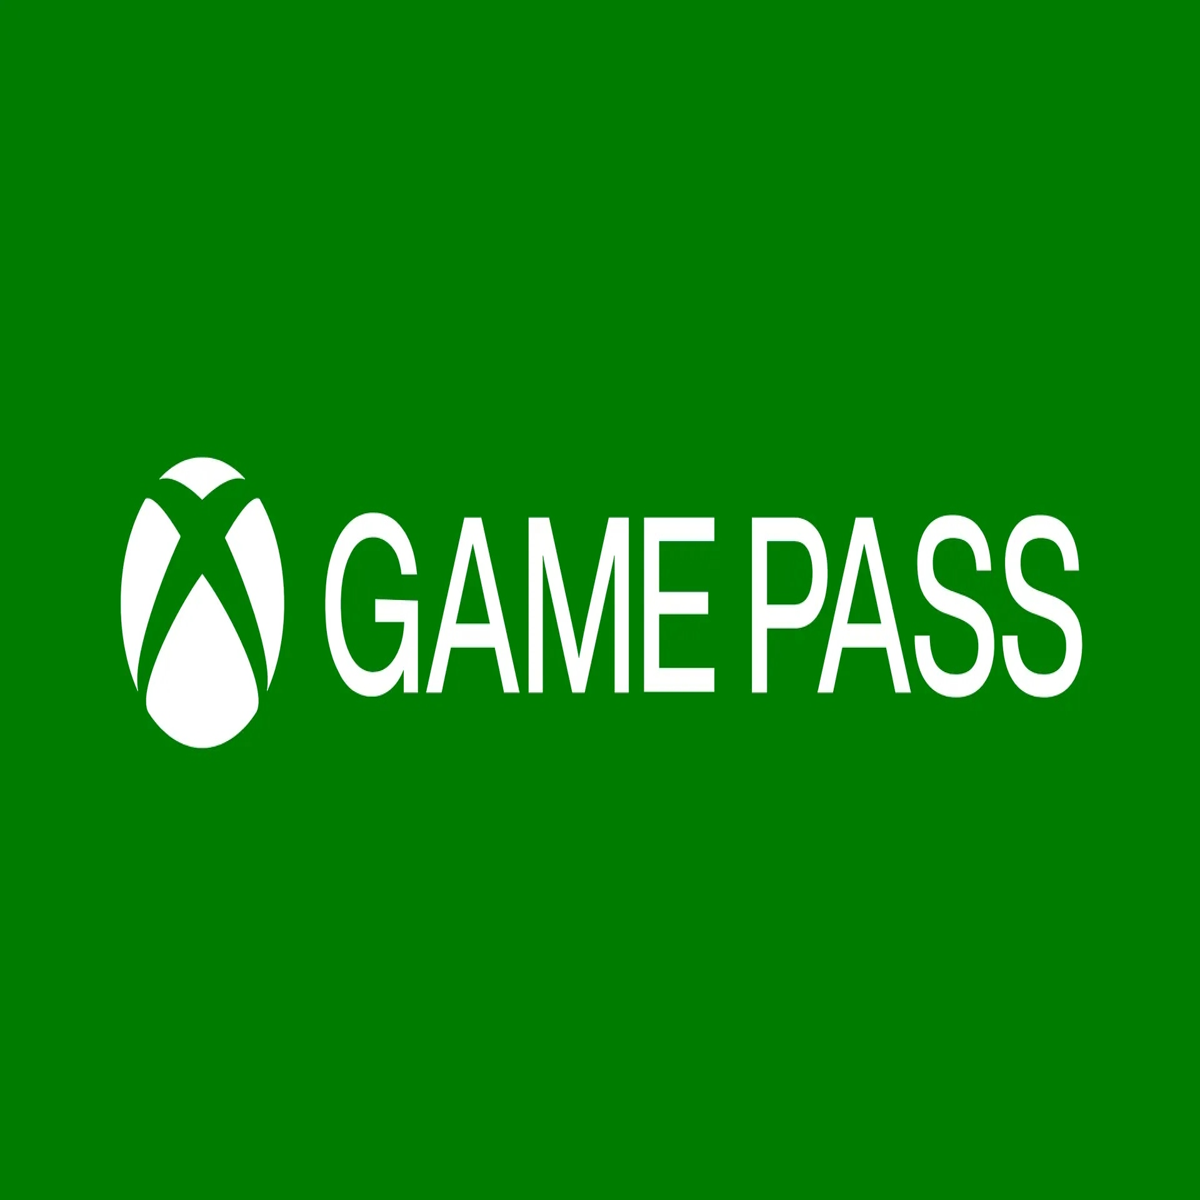 Xbox Game Pass: Get 1 month of Ultimate access for just $1